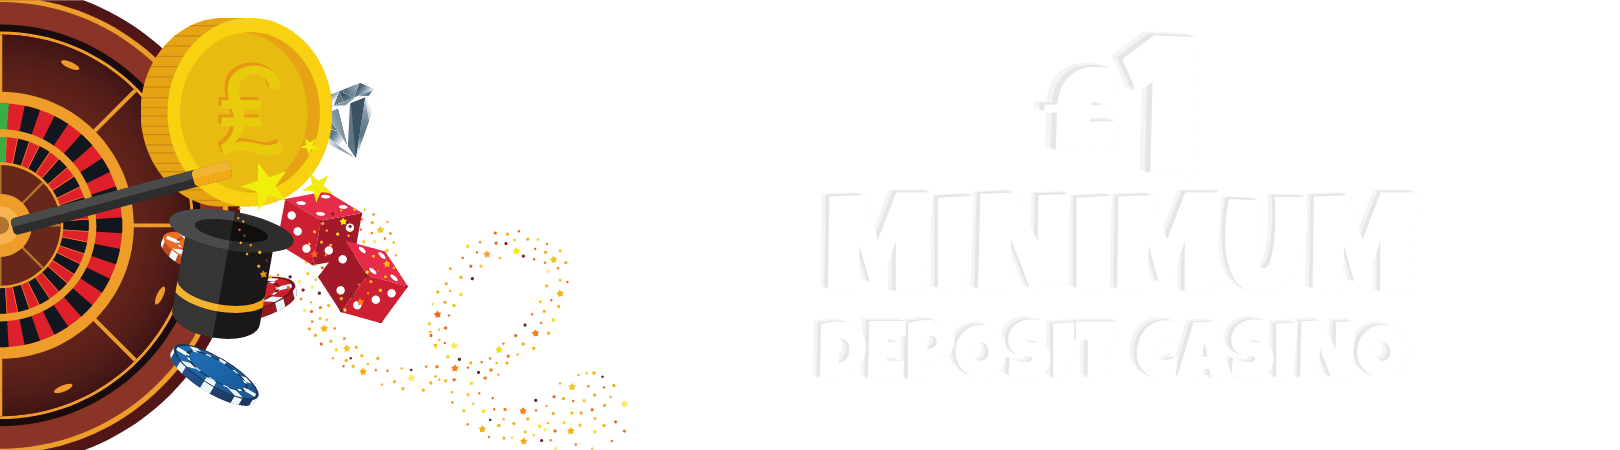 How to Join a £1 Minimum Deposit Casino and Make Your First Deposit img